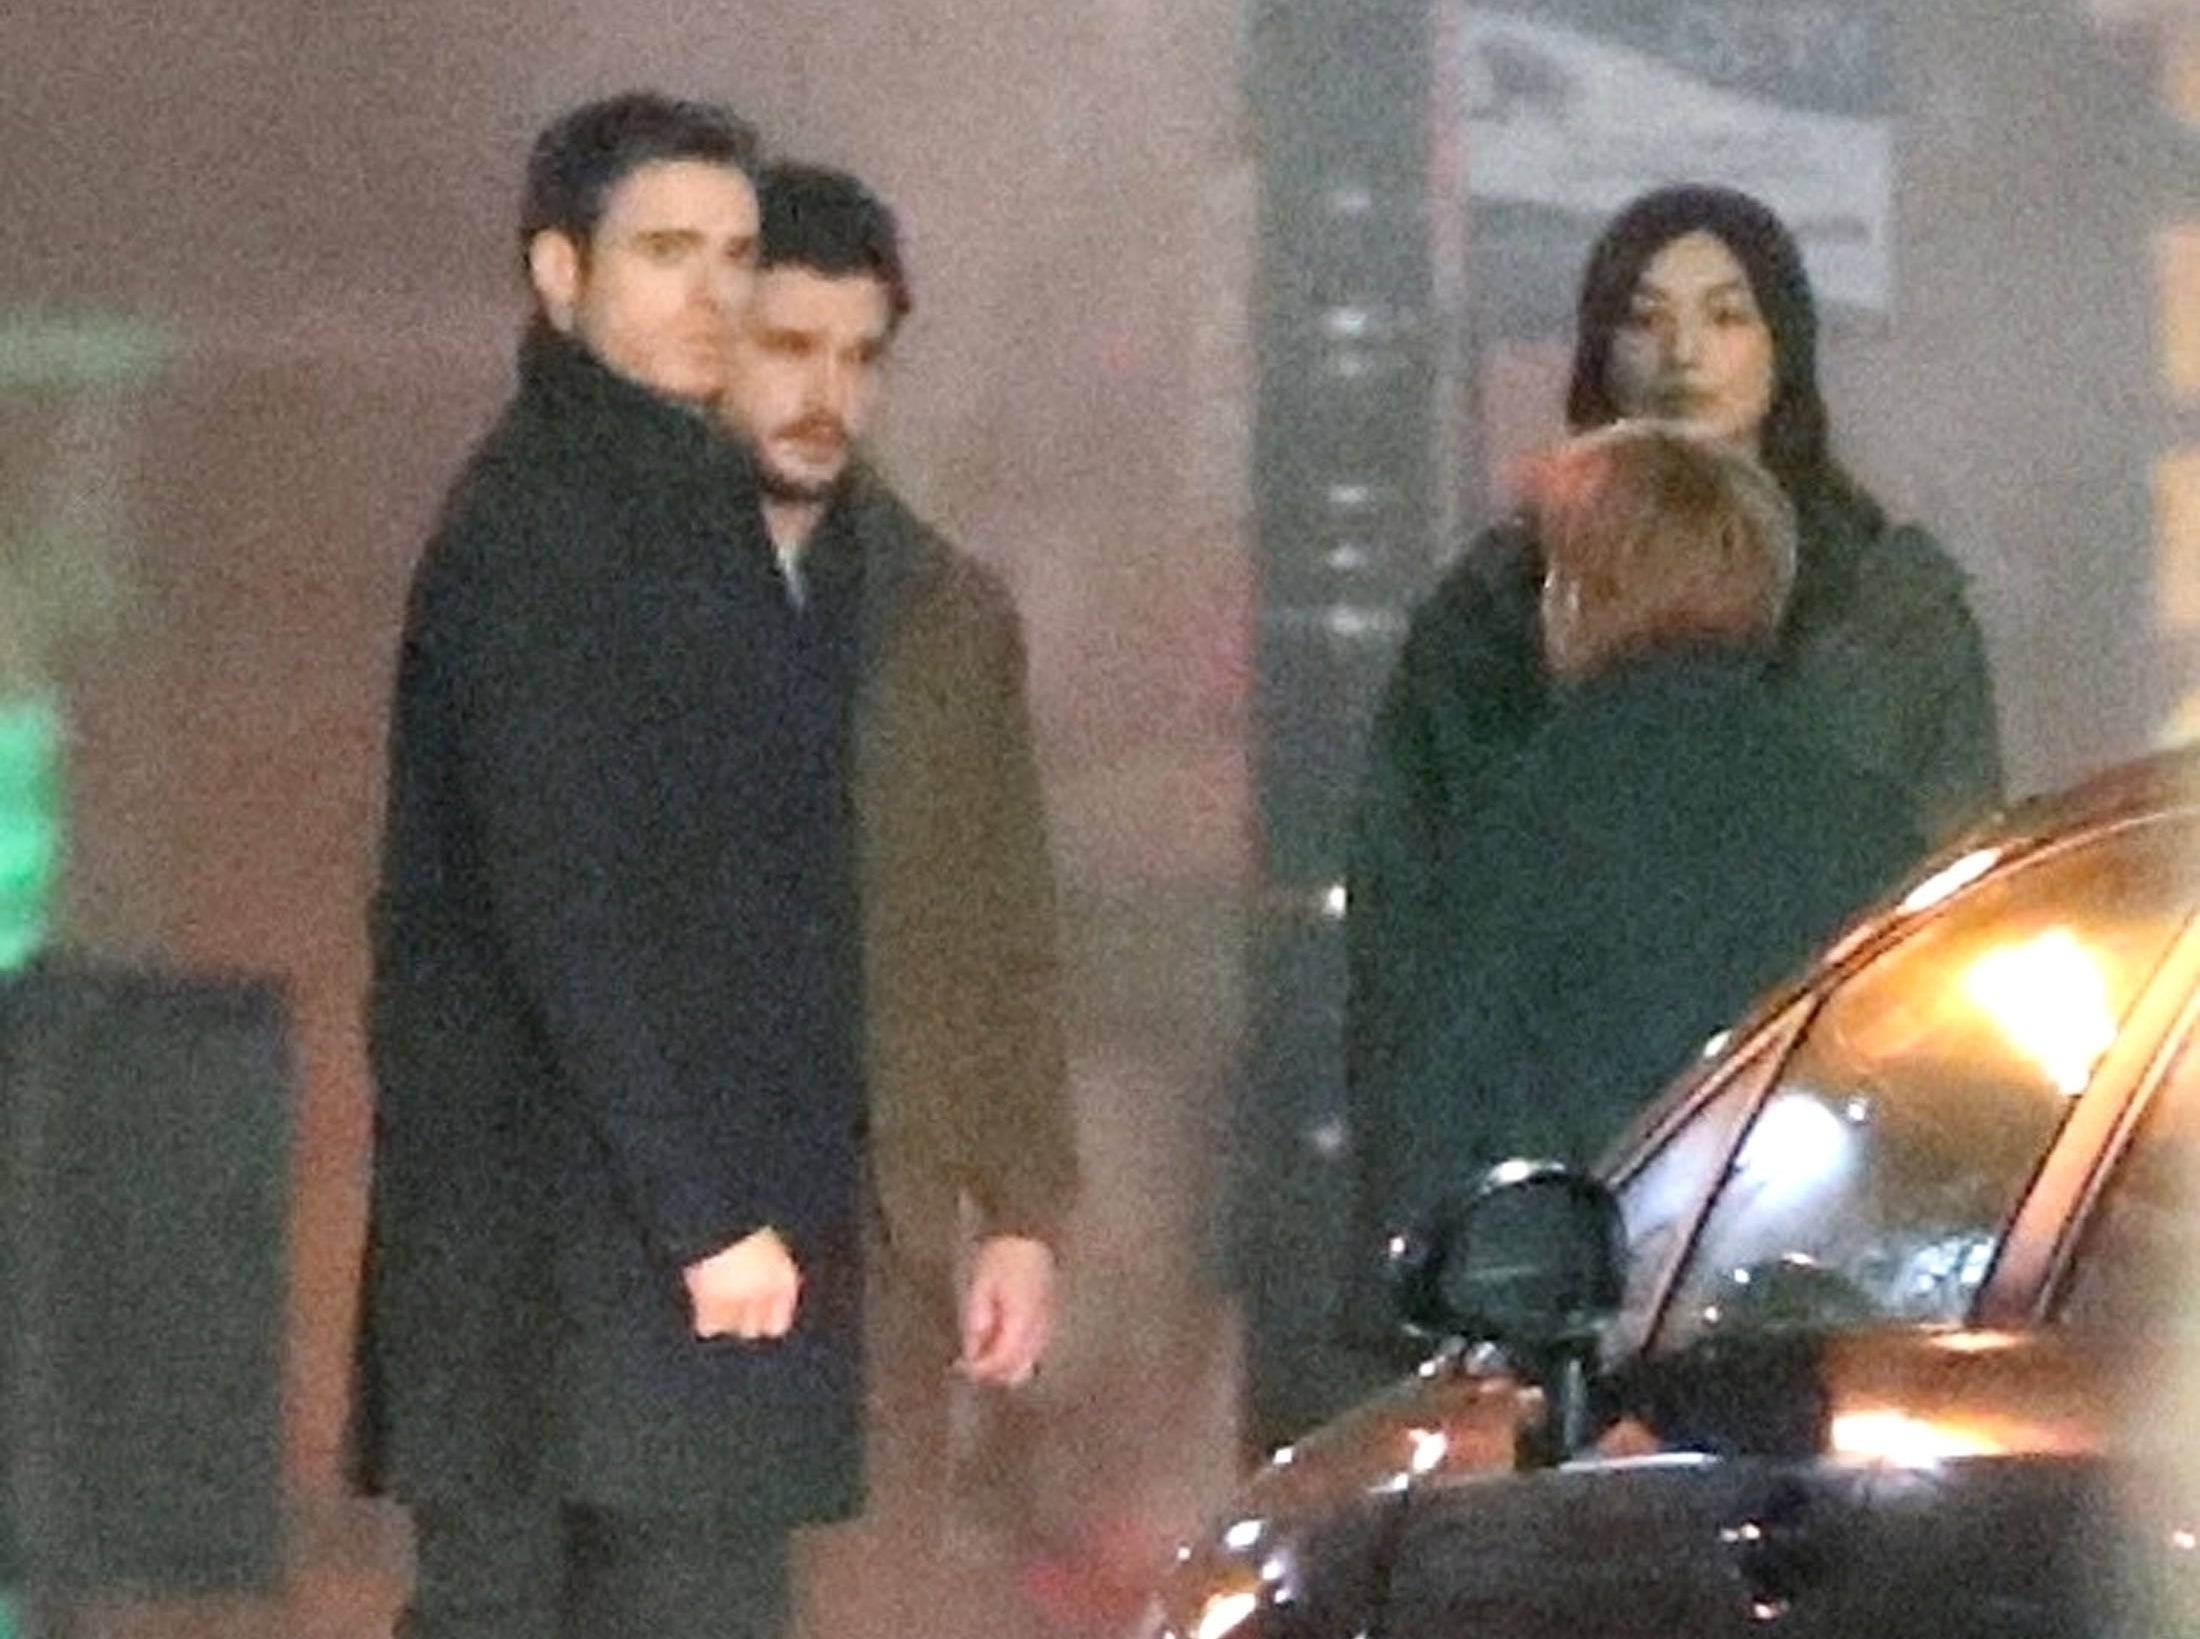 Actors Gemma Chan, Richard Madden, and Kit Harington are spotted on the set in Camden filming Eternals